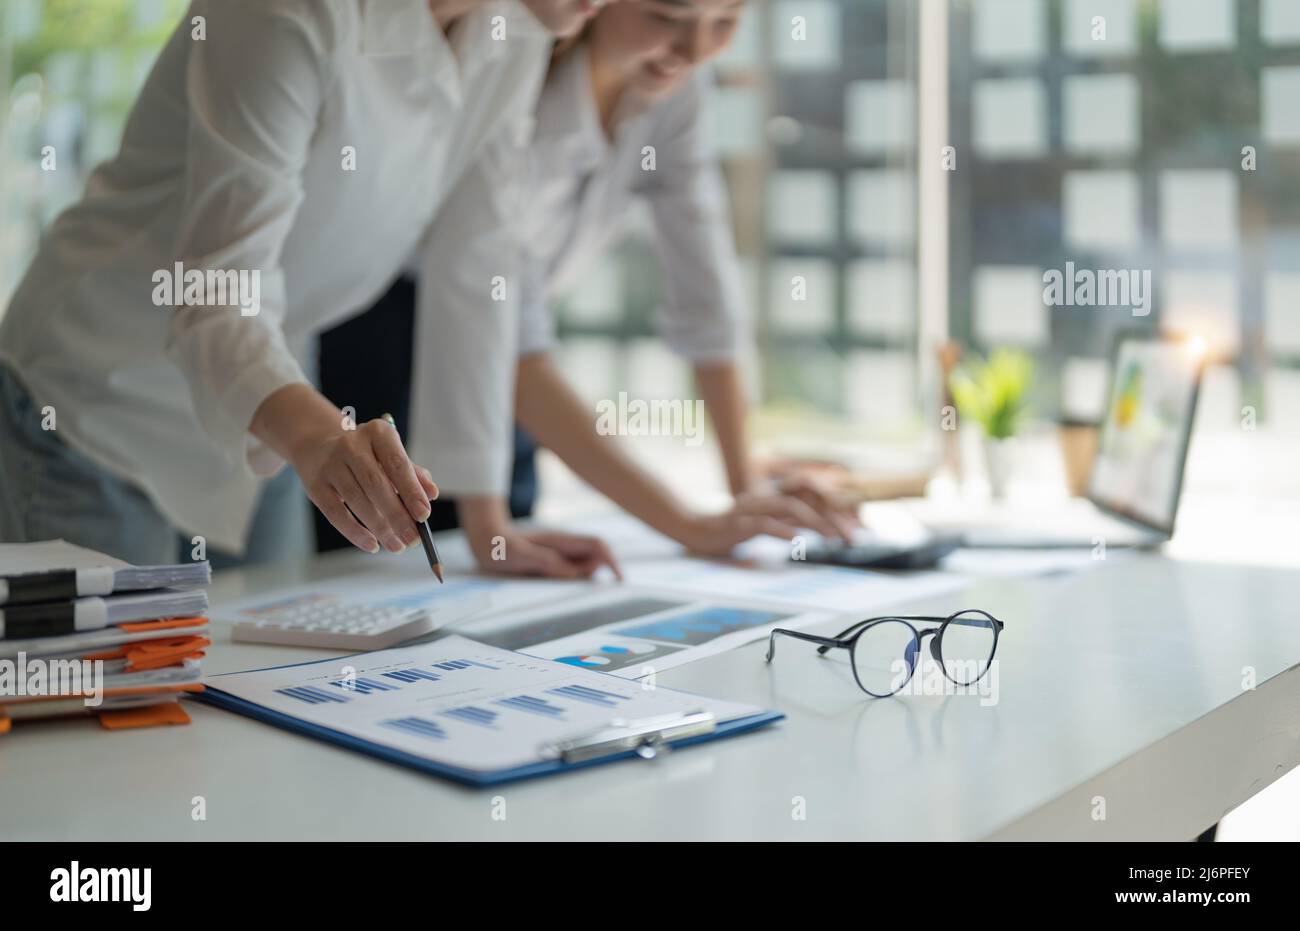 Business people are meeting discussion for analysis data figures to plan business strategies. Business discussing startup concept Stock Photo